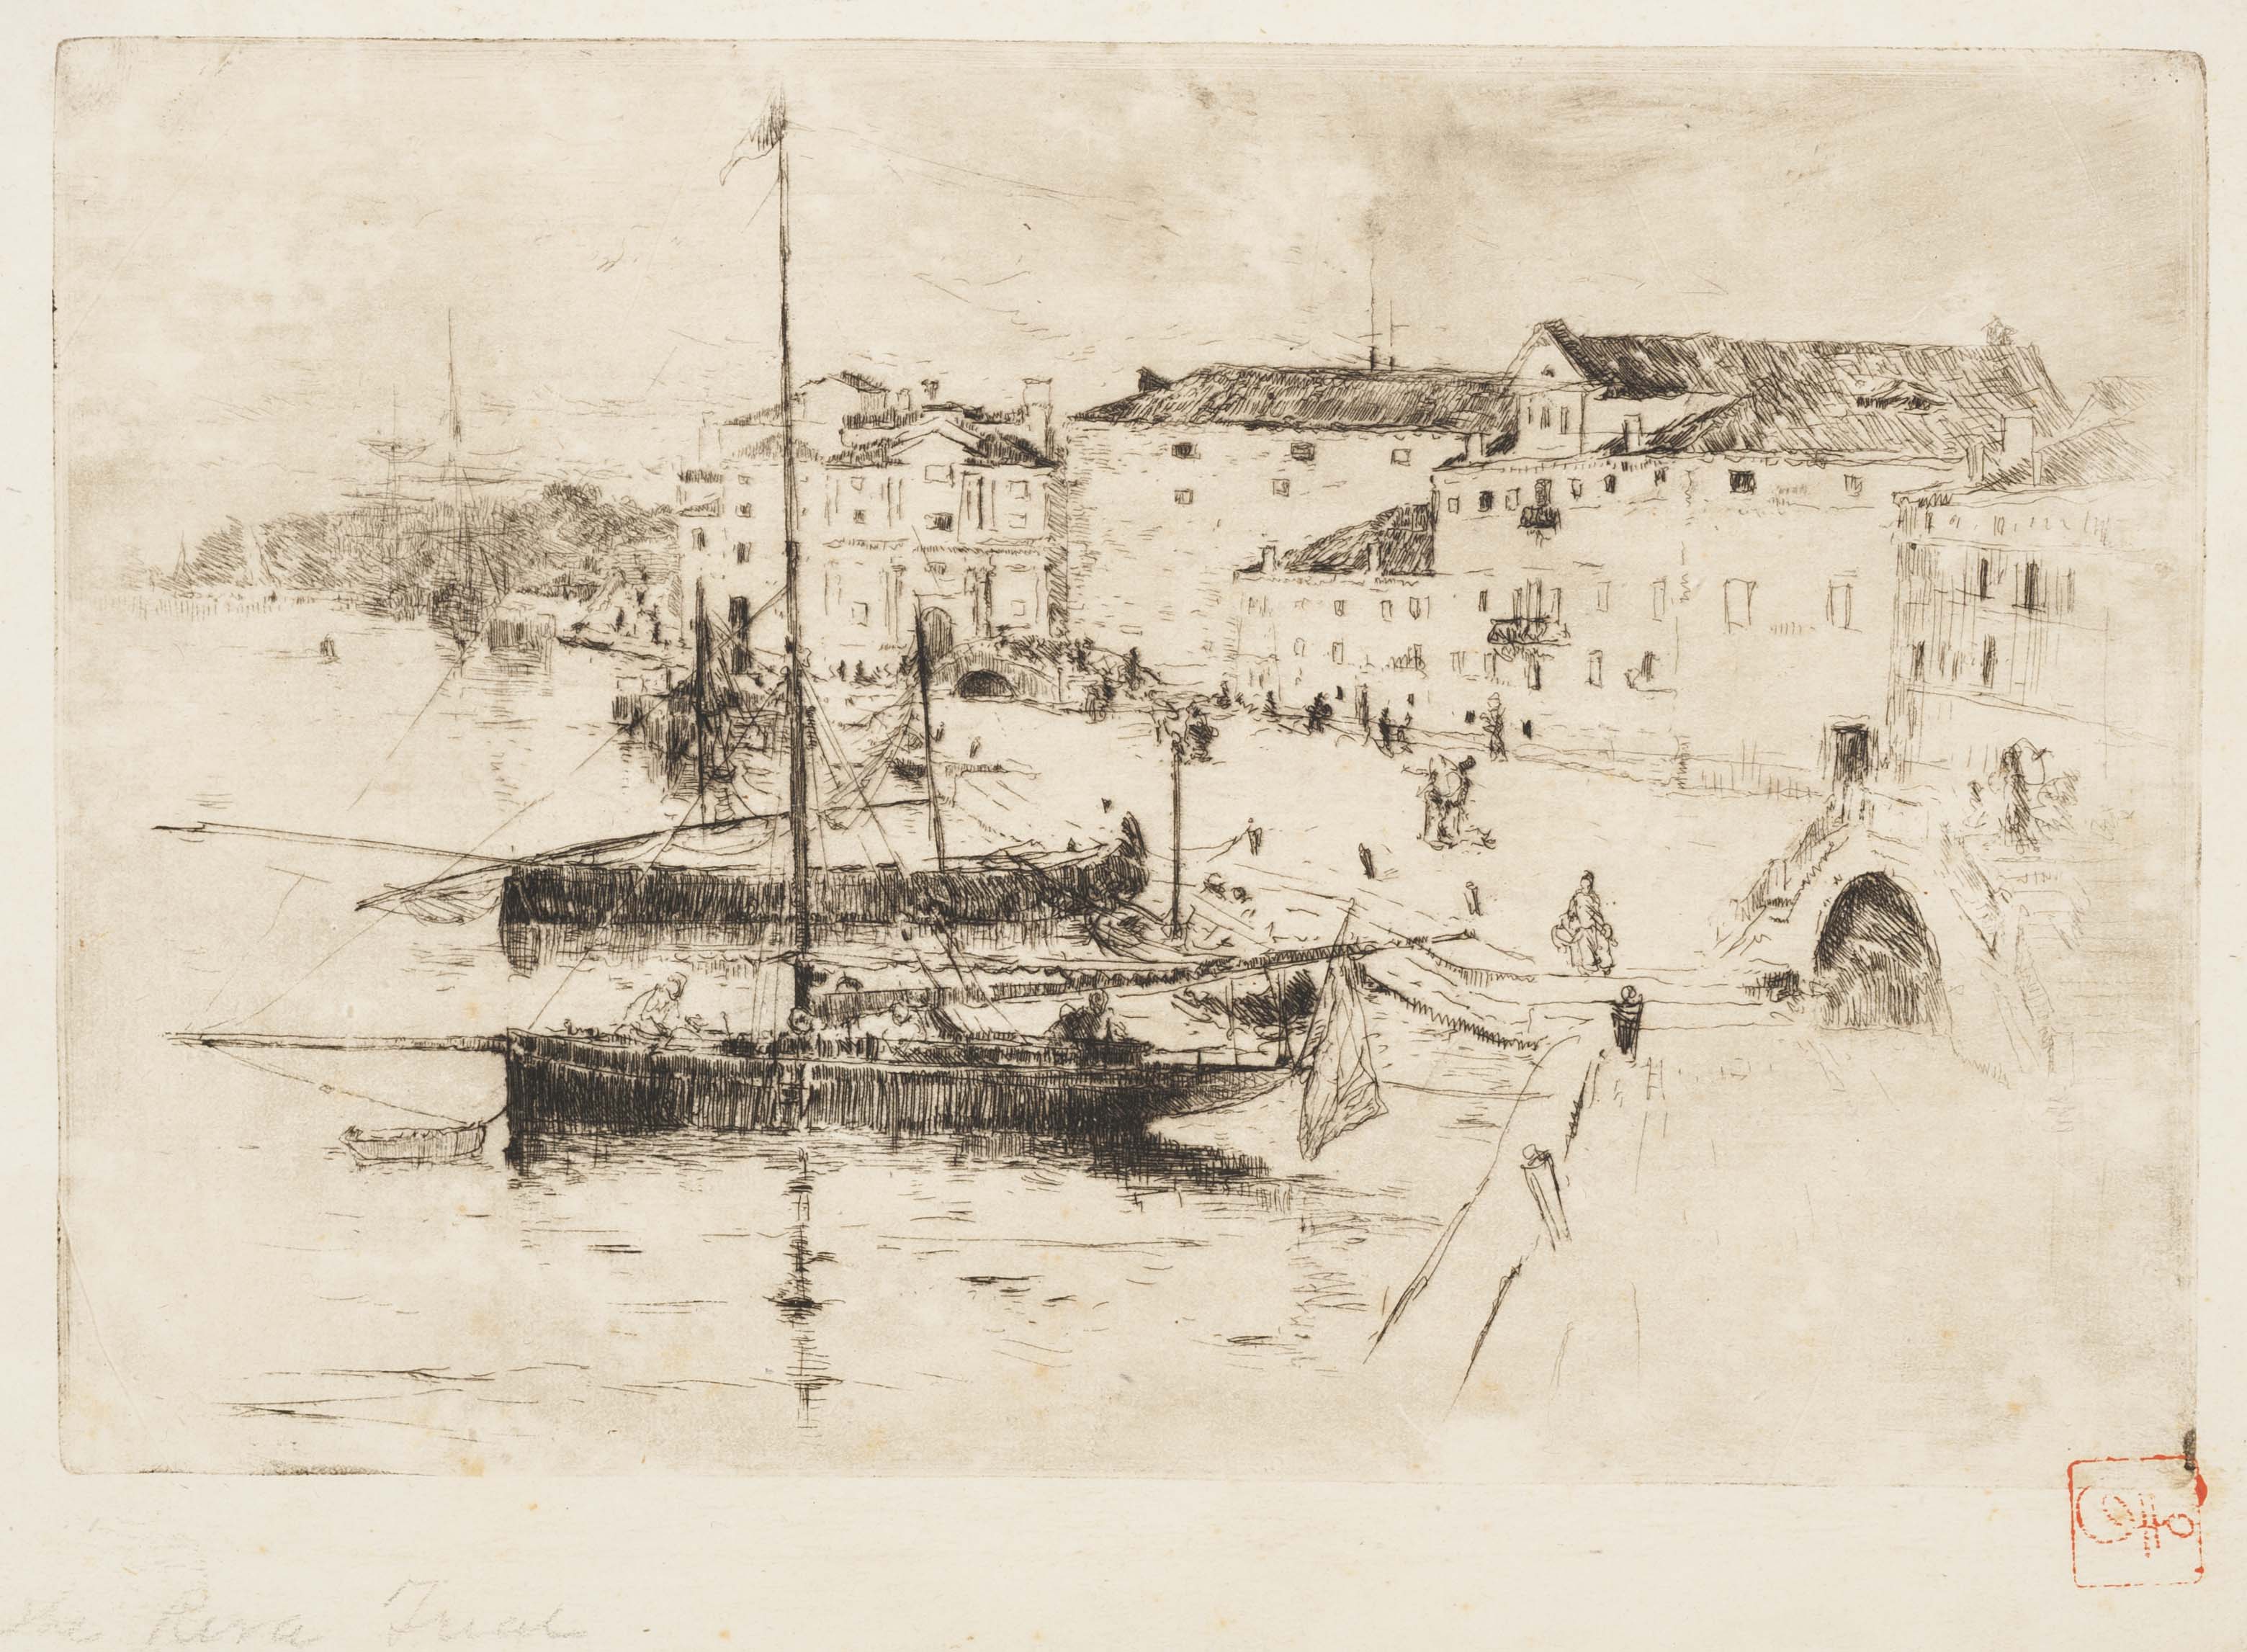 Frank Duveneck's The Riva, a faint etching of some sail boats docked in a marina, small foot bridges and several buildings fade off into the distance